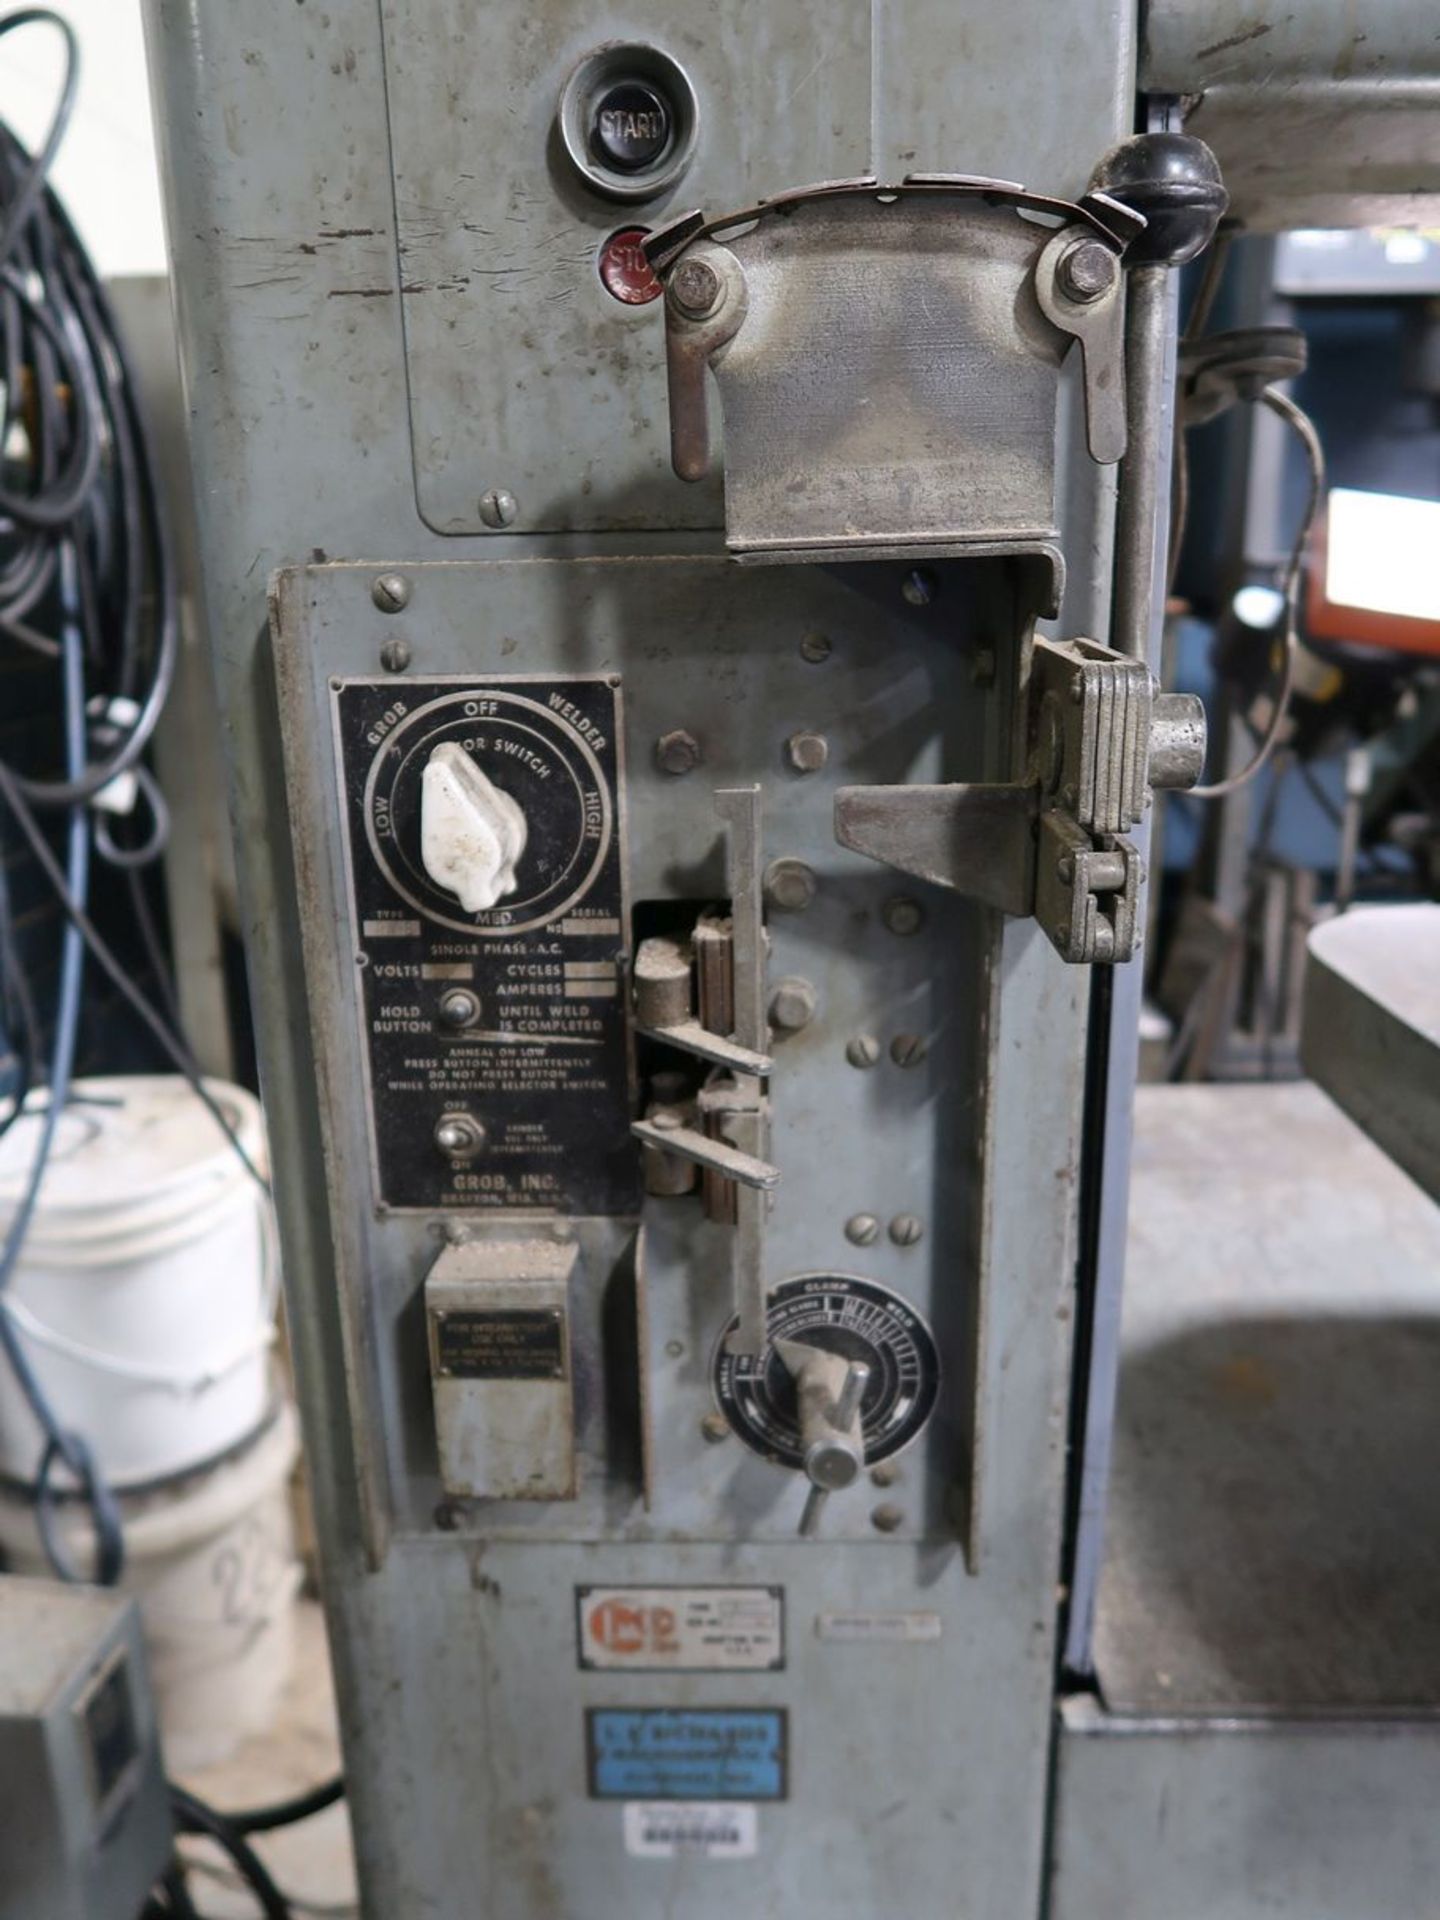 18" GROB NS18 VERTICAL BAND SAW; S/N 83332-TR29, BLADE WELDER - Image 5 of 7